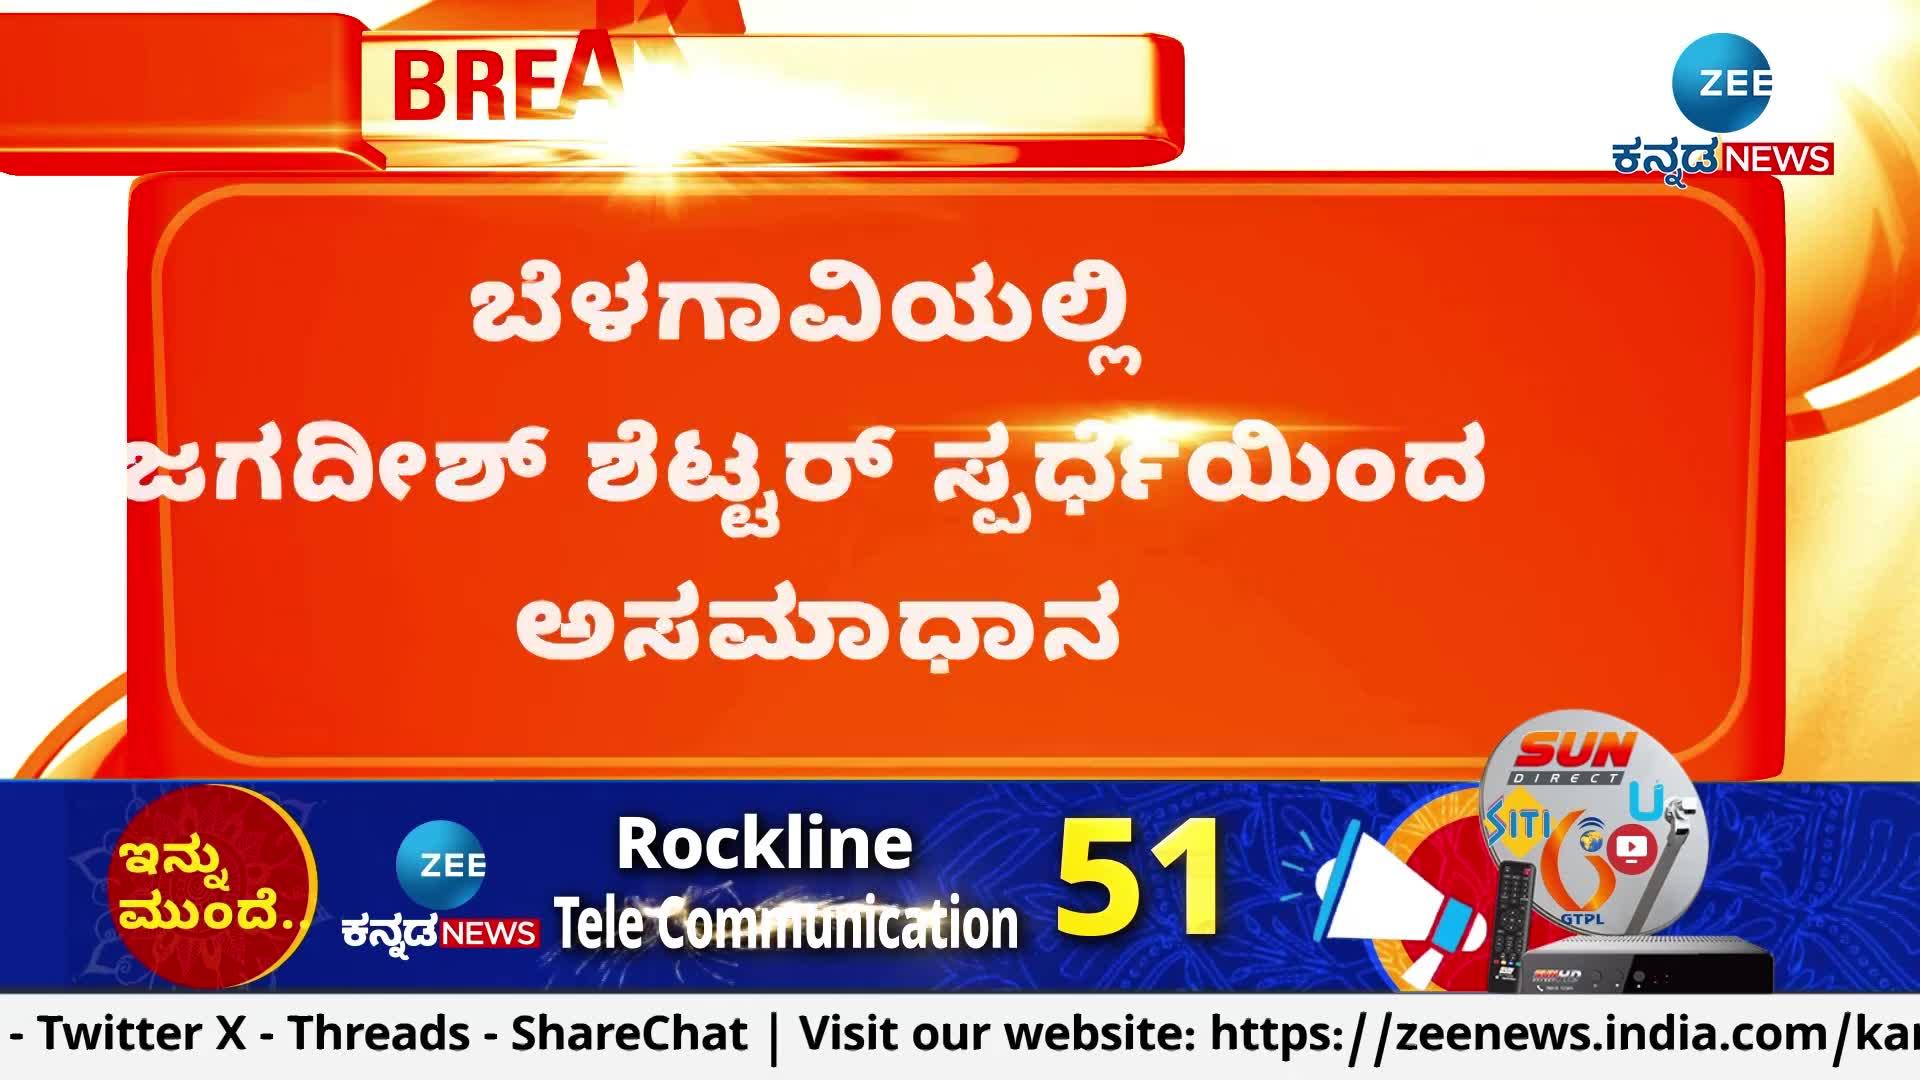 Jagdish Shettar is upset with the competition in Belagavi!